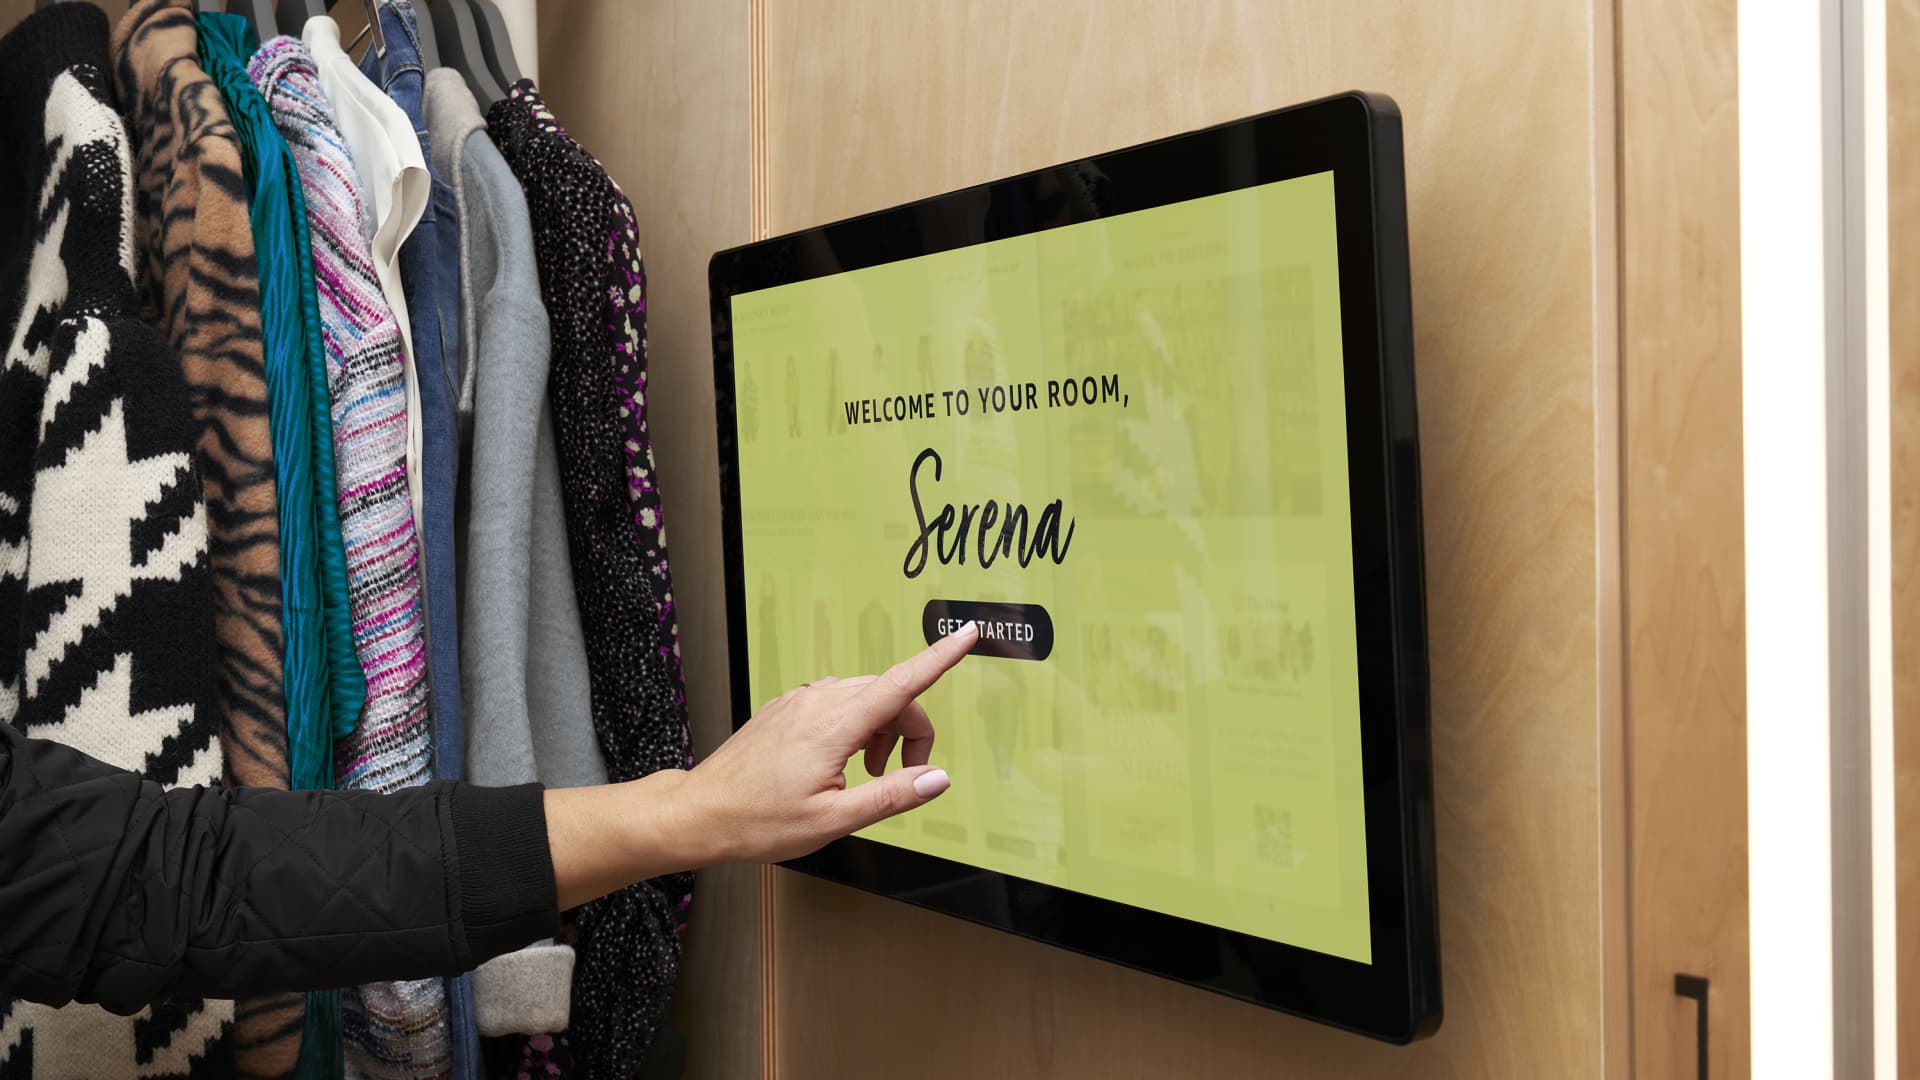 Touchscreen displays will be installed in the fitting rooms so shoppers rate items or request different styles or sizes, according to Amazon.